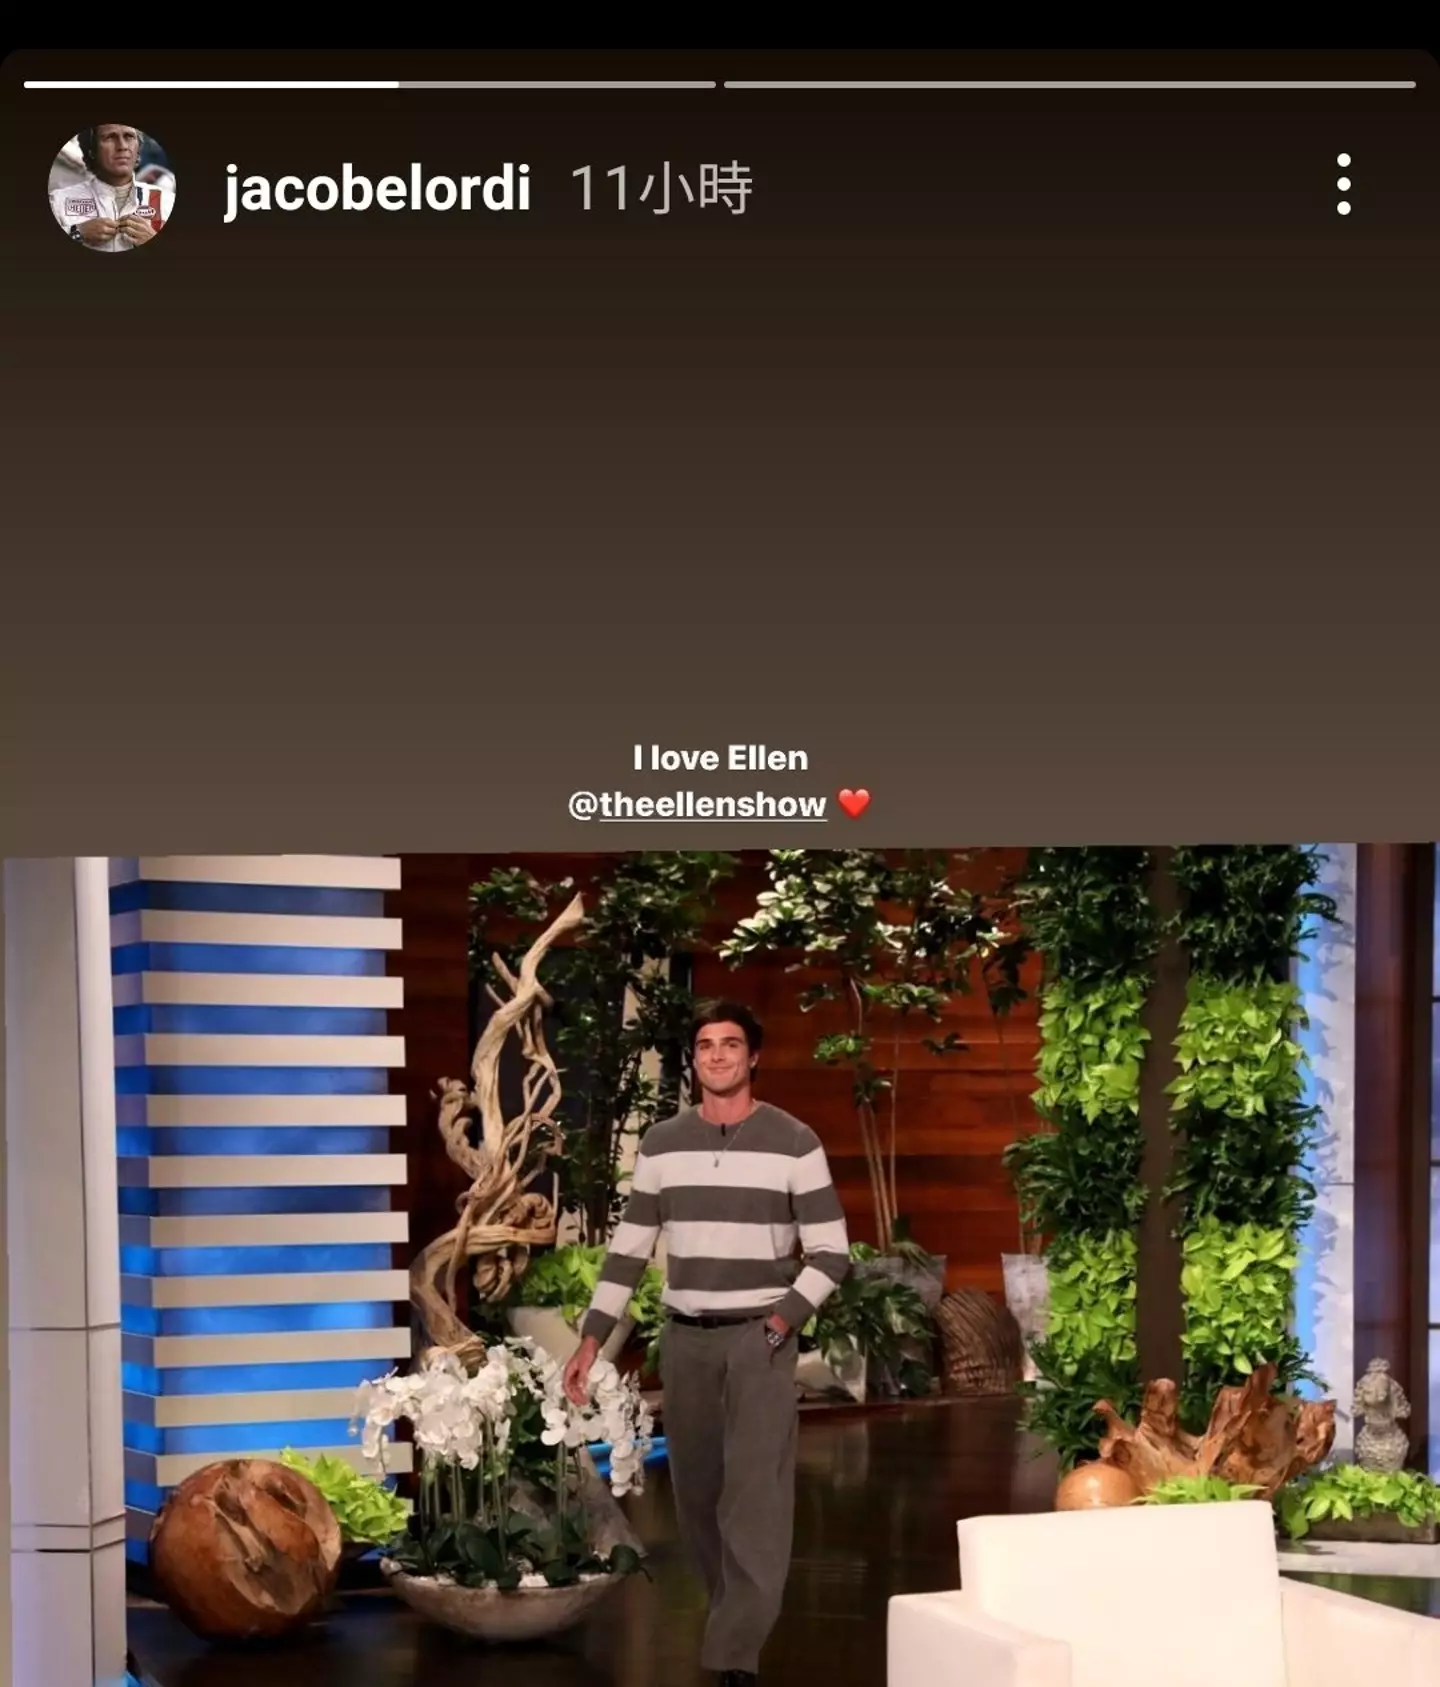 Jacob Elordi appeared to respond to fan backlash on his Instagram story (Instagram/@jacobelordi)